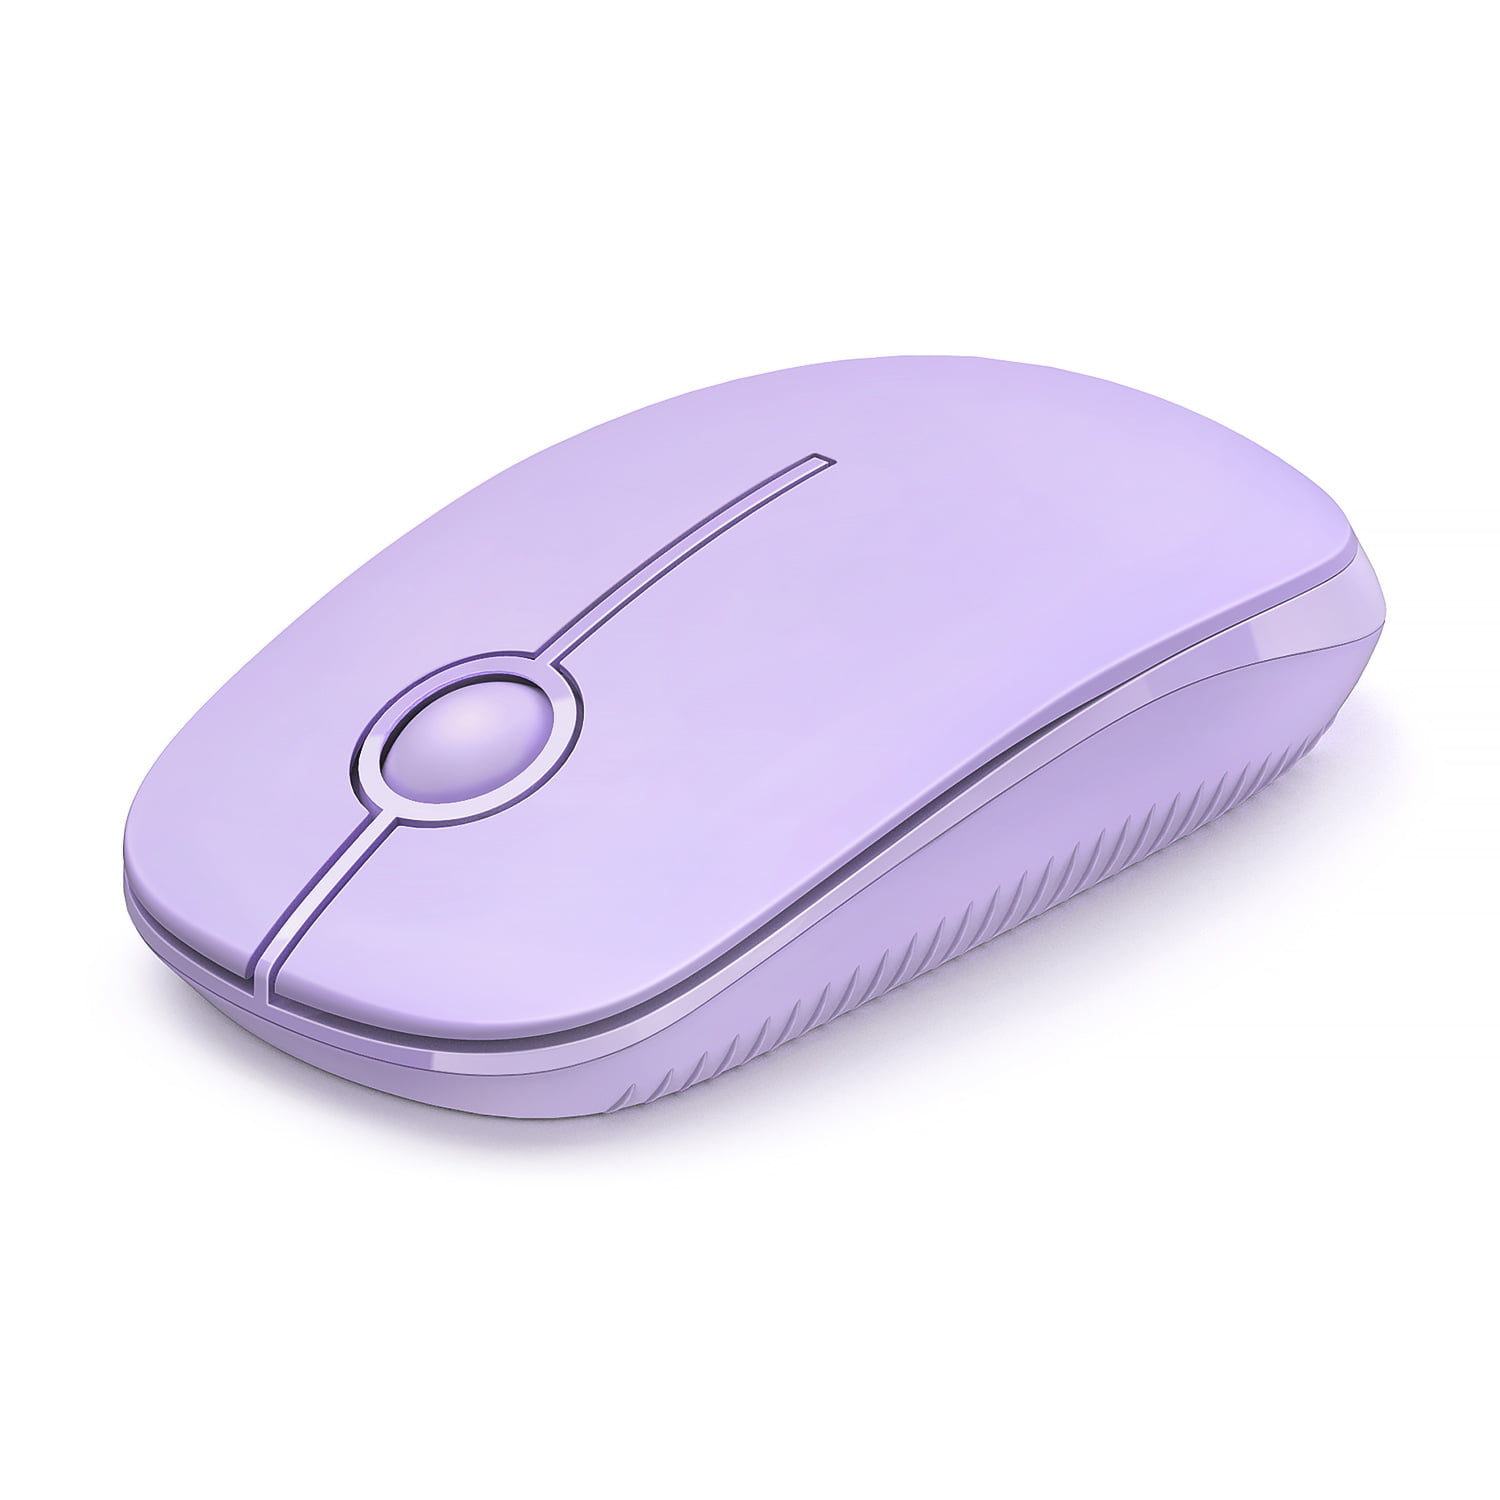 2.4G Wireless Mouse with Cute Pattern Design for All Laptops and Desktops with Nano Receiver Floral 